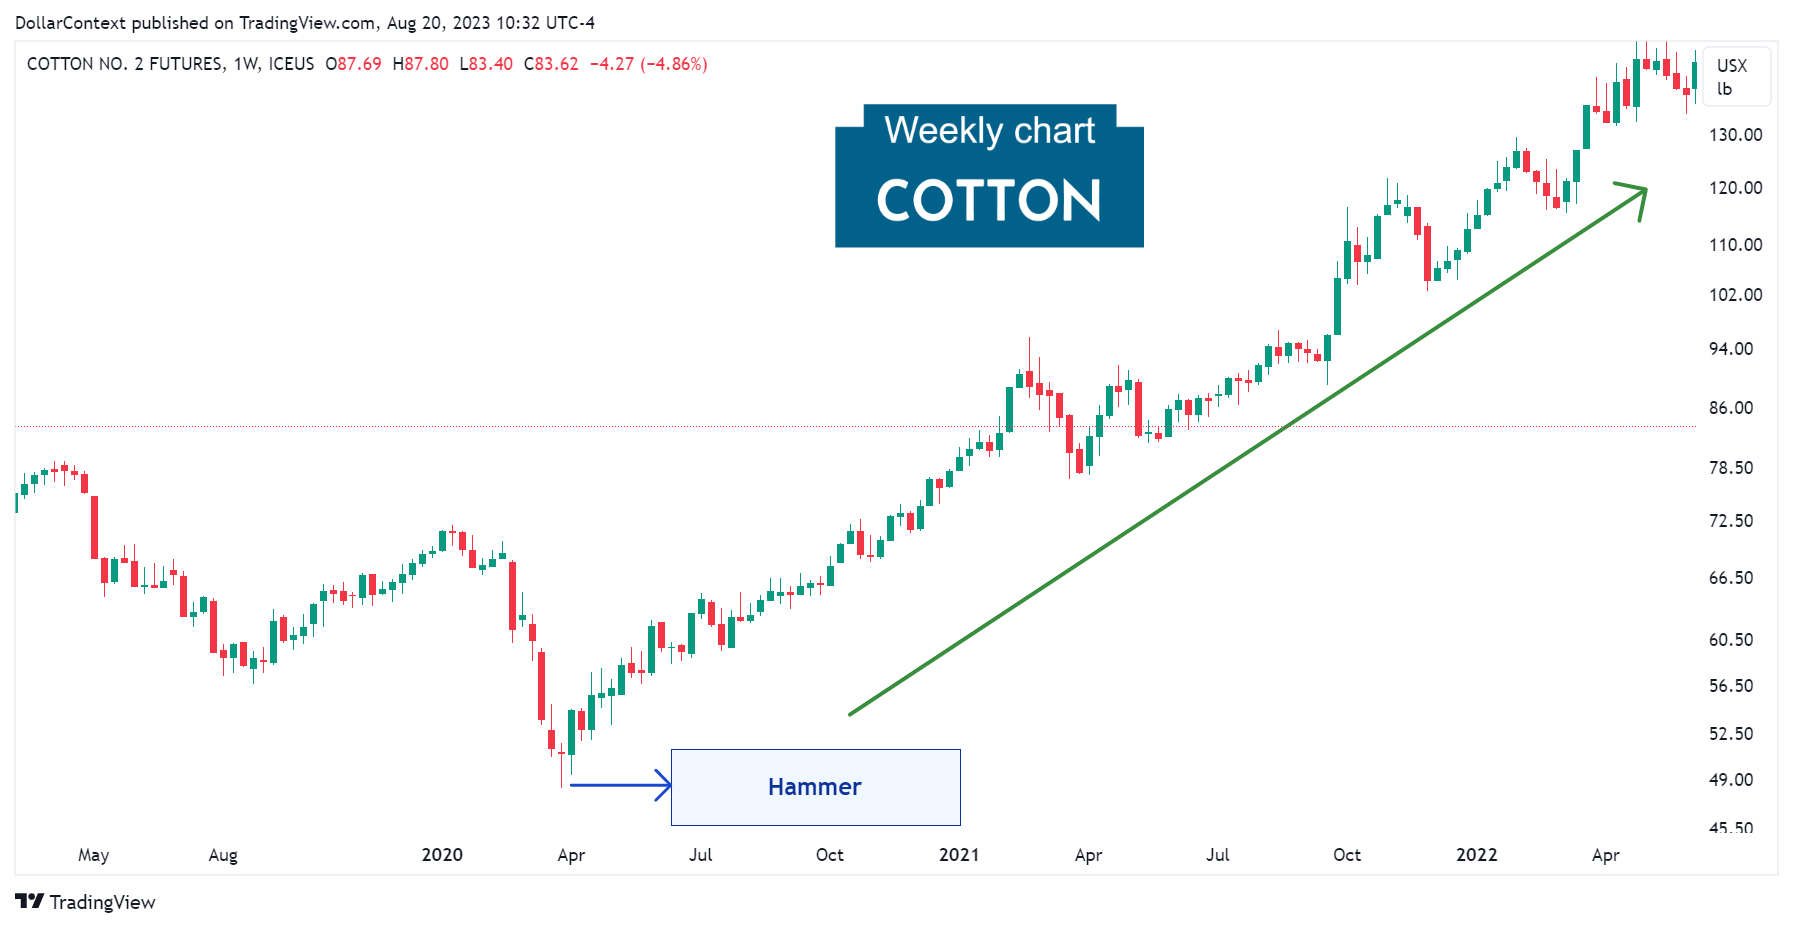 Cotton Futures: Hammer Before a Notable Uptrend. March 2020 (Weekly Chart)